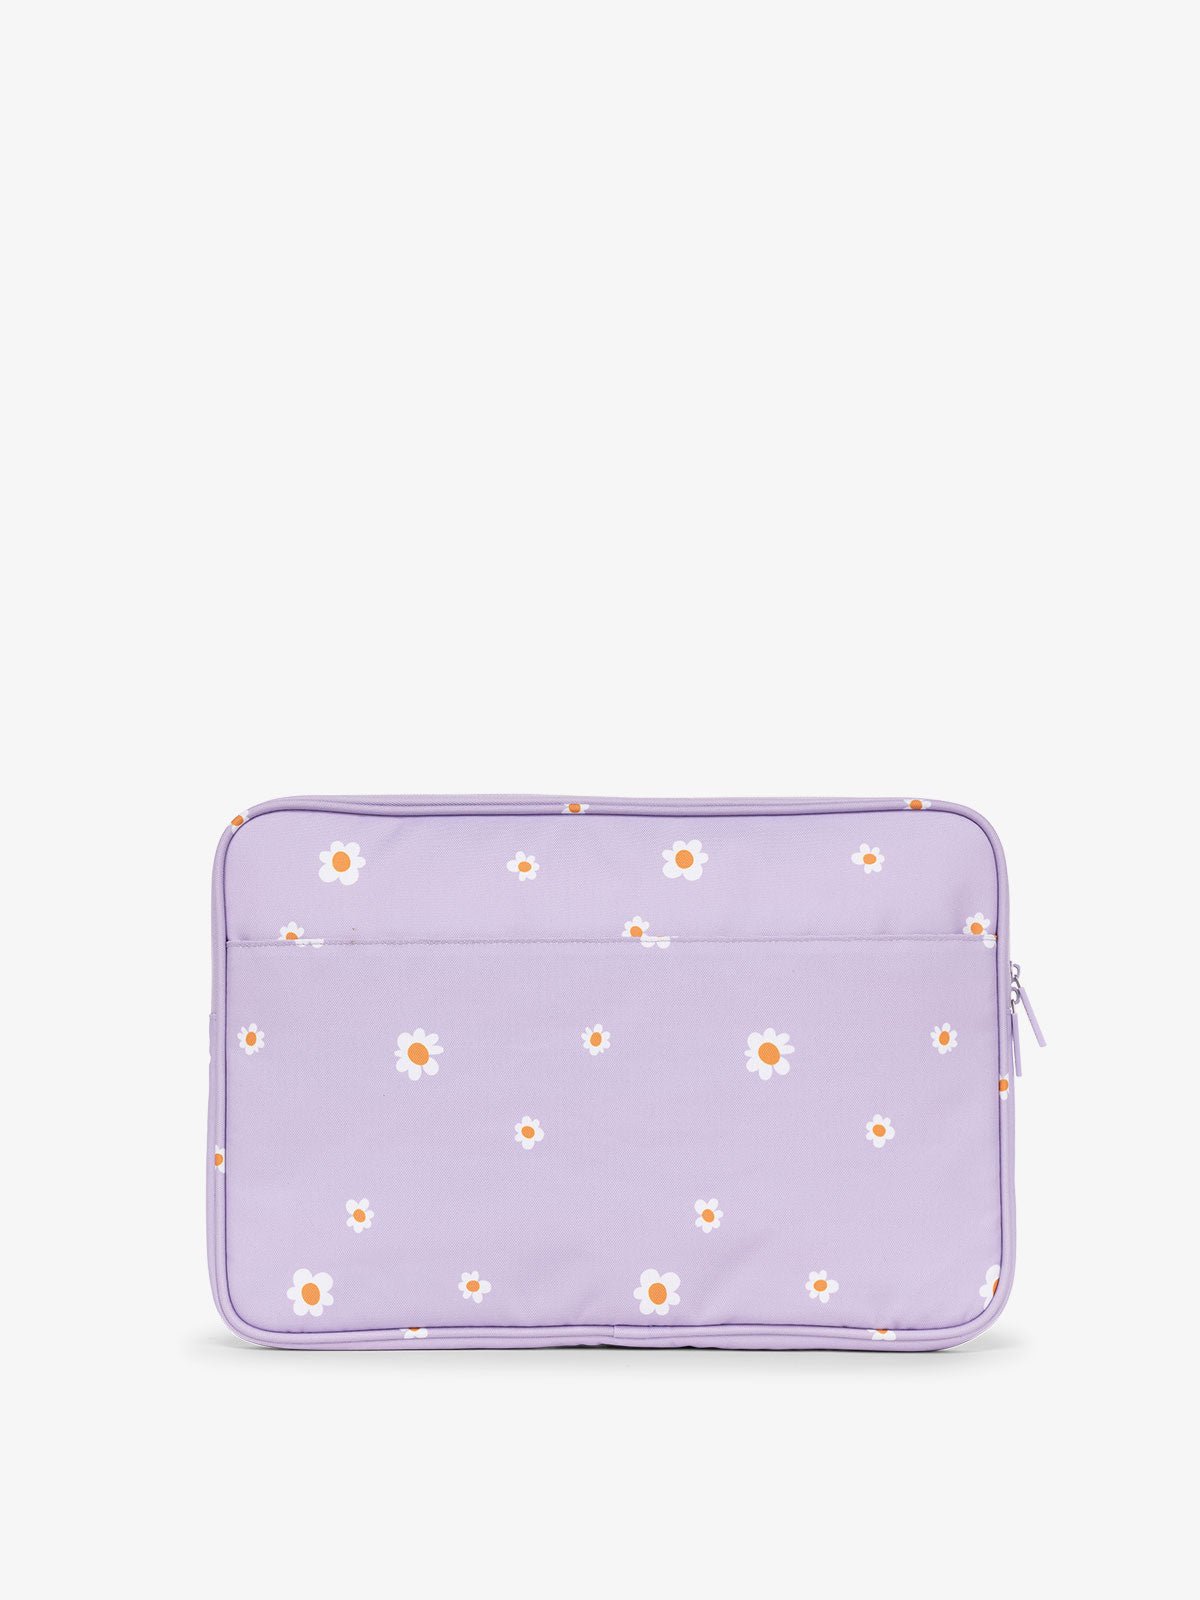 CALPAK 15-17 Inch water resistant Laptop Case with padded pockets in floral lavender print